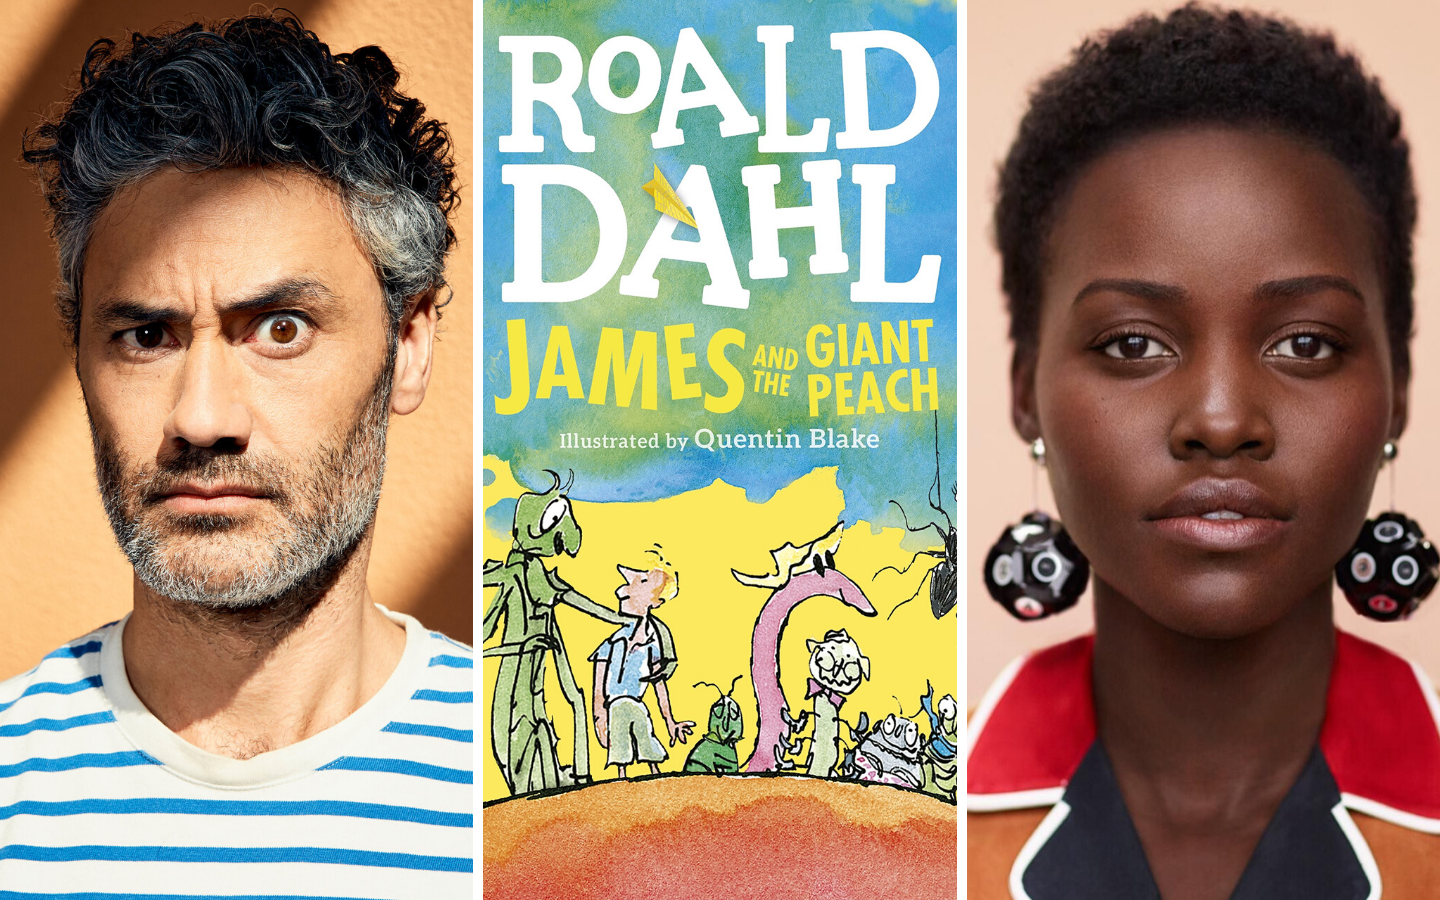 Star-Studded ‘James and the Giant Peach’ Charity Read-Along Features Taika Waititi, Lupita Nyong’o & More